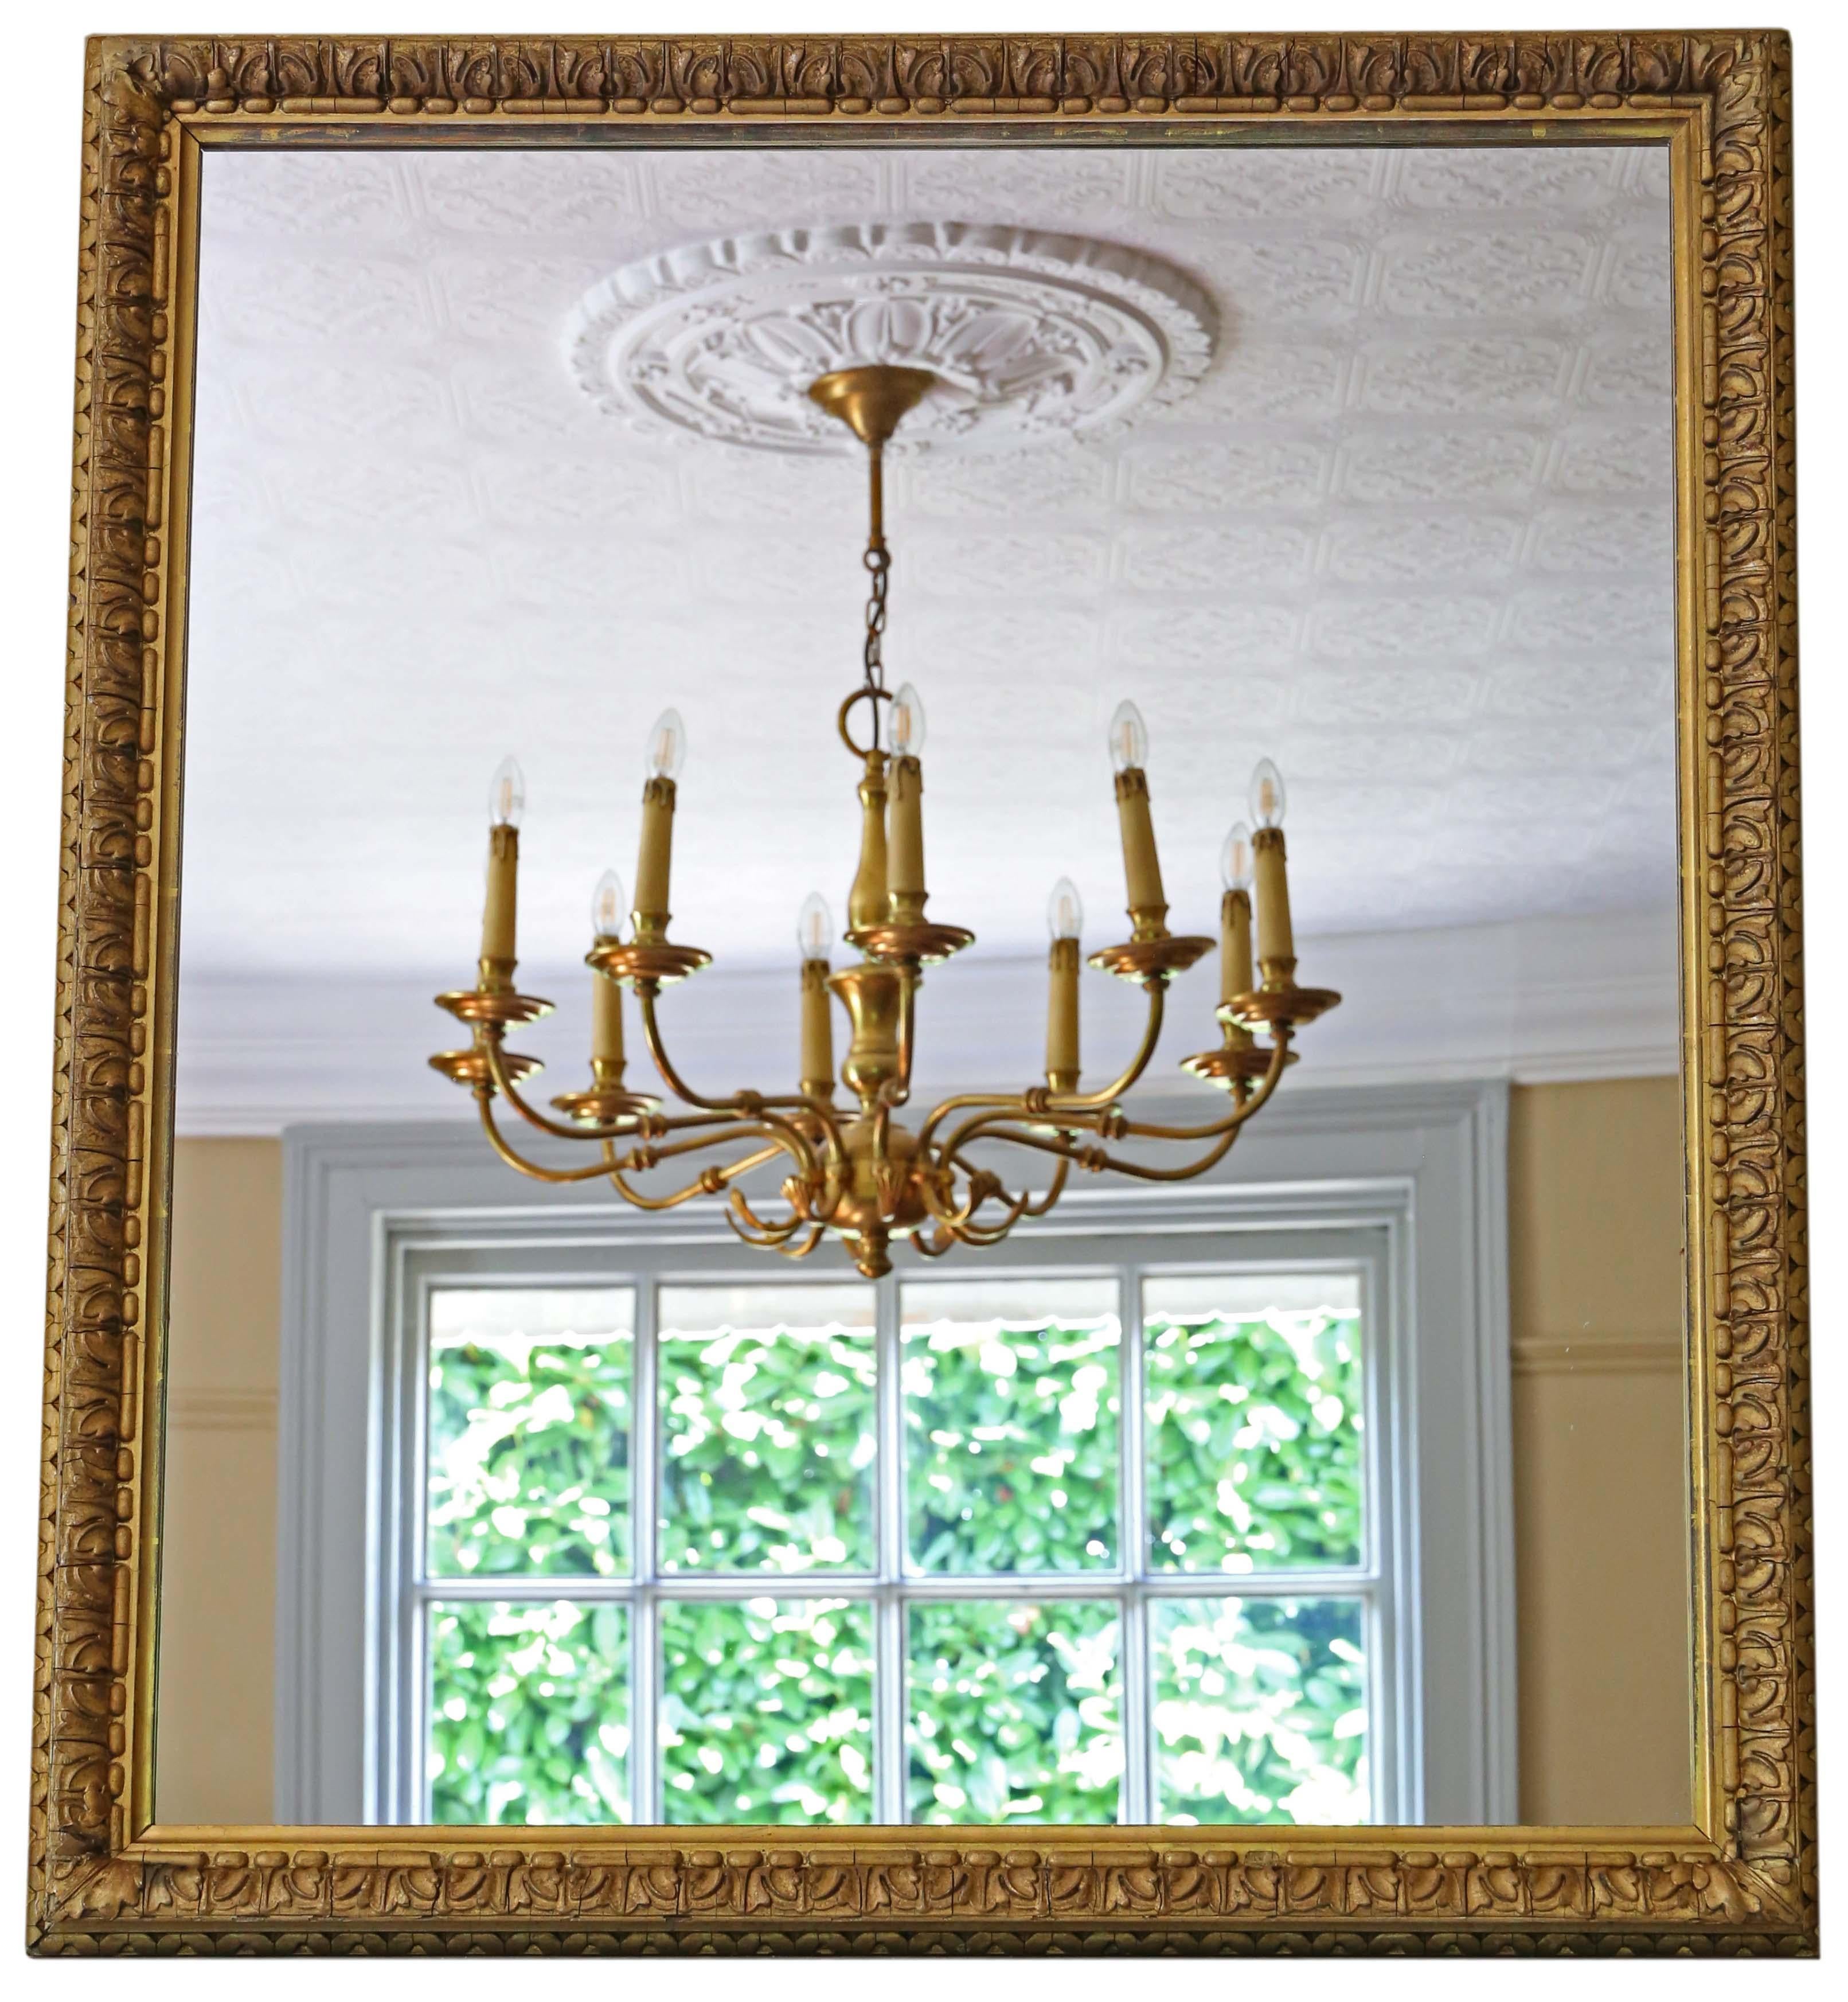 Antique fine quality large gilt 19th Century overmantle or wall mirror with a lovely charm and elegance.

This is a lovely, rare mirror and a great decorative find.

An impressive and rare find, that would look amazing in the right location. No